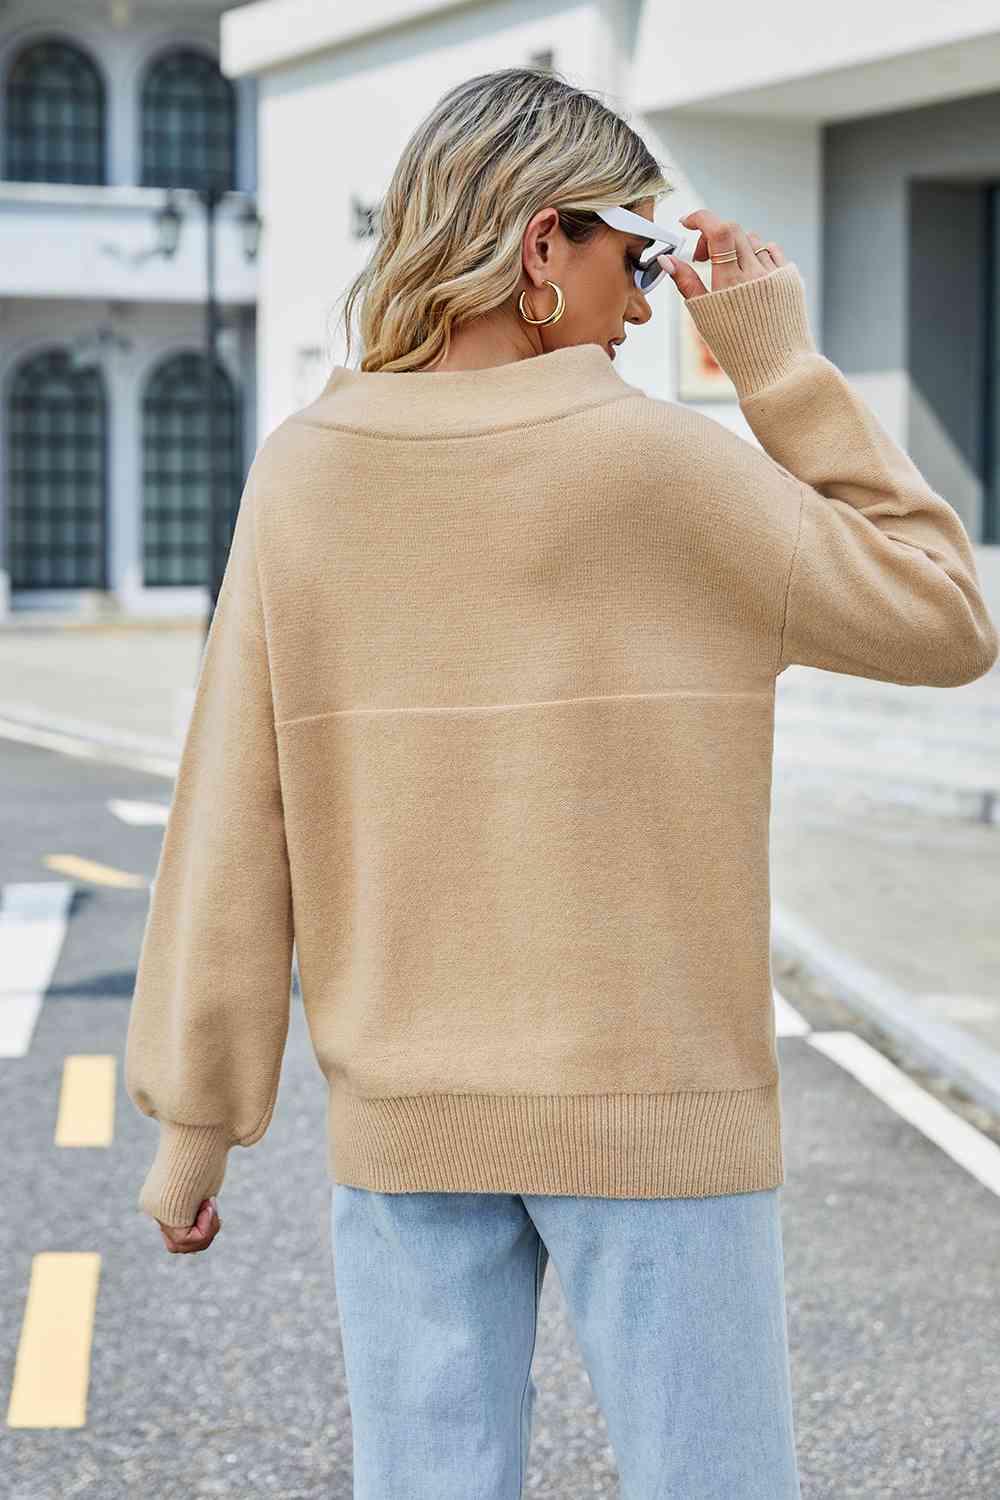 The802Gypsy sweater GYPSY-Long Sleeve Ribbed Trim Sweater